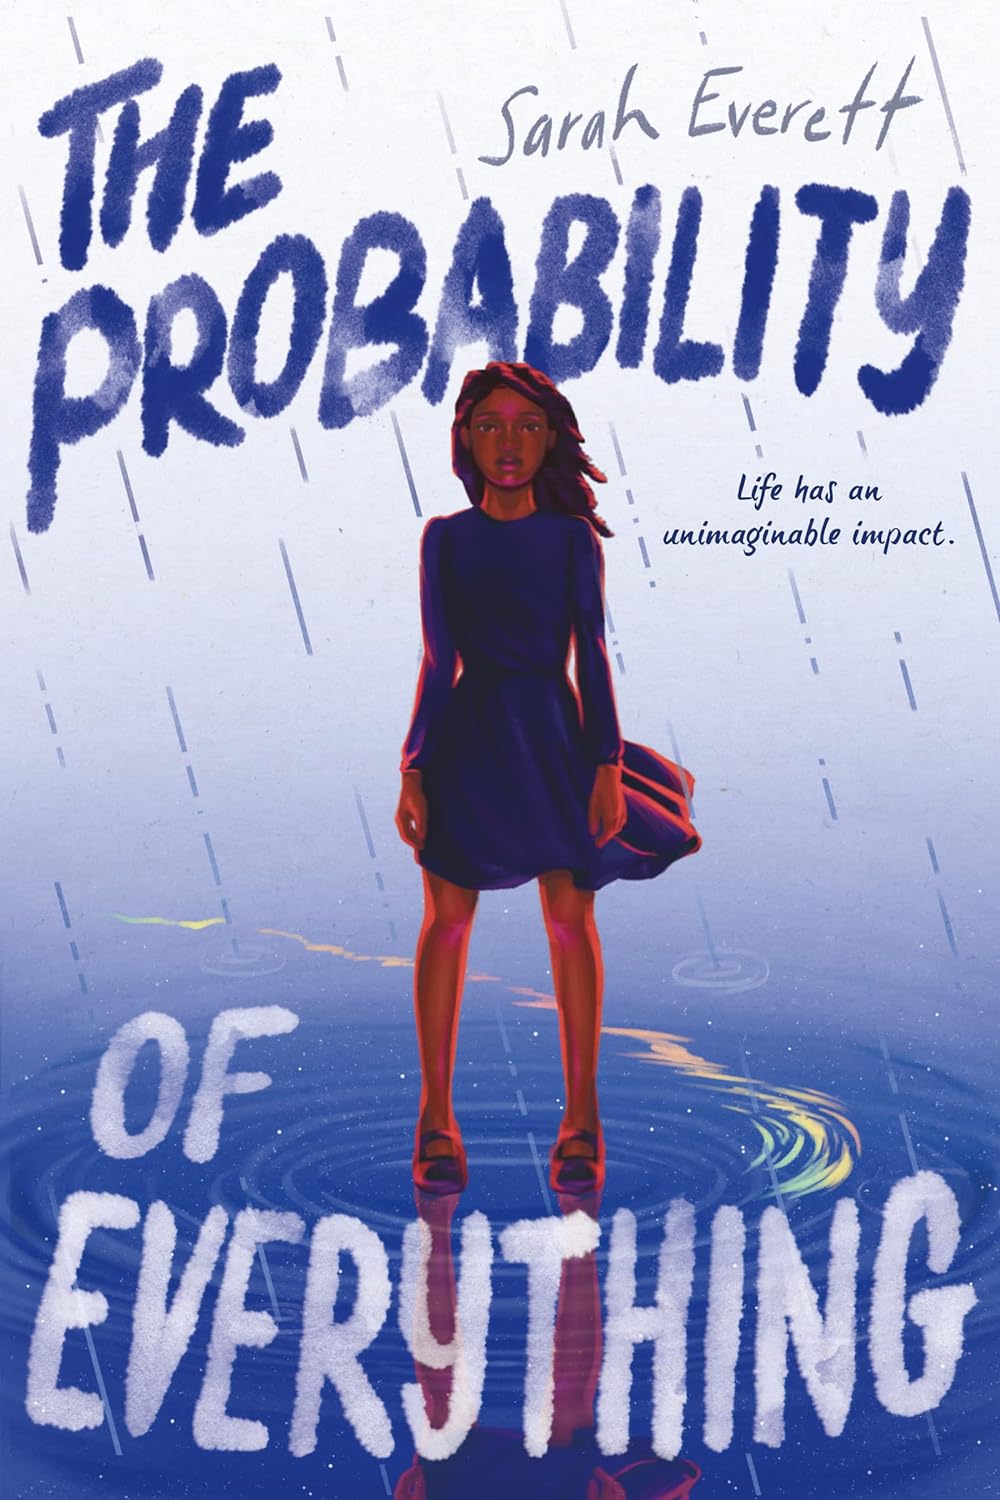 middle school books - The Probability of Everything by Sarah Everett